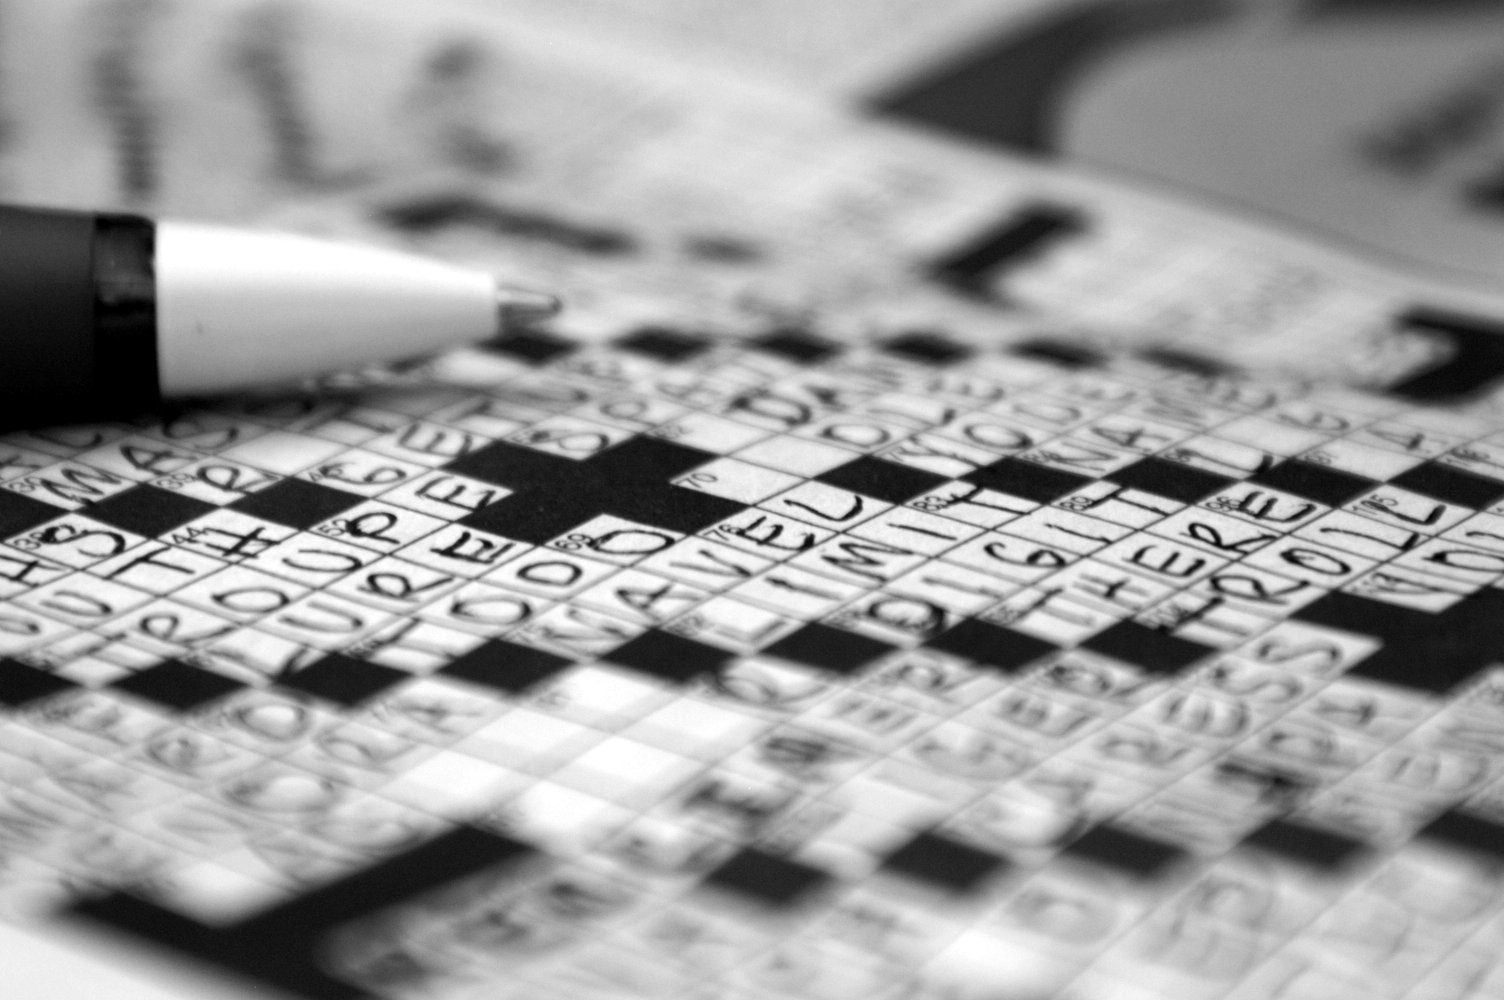 Local newspaper crossword at a cross paths - JSource